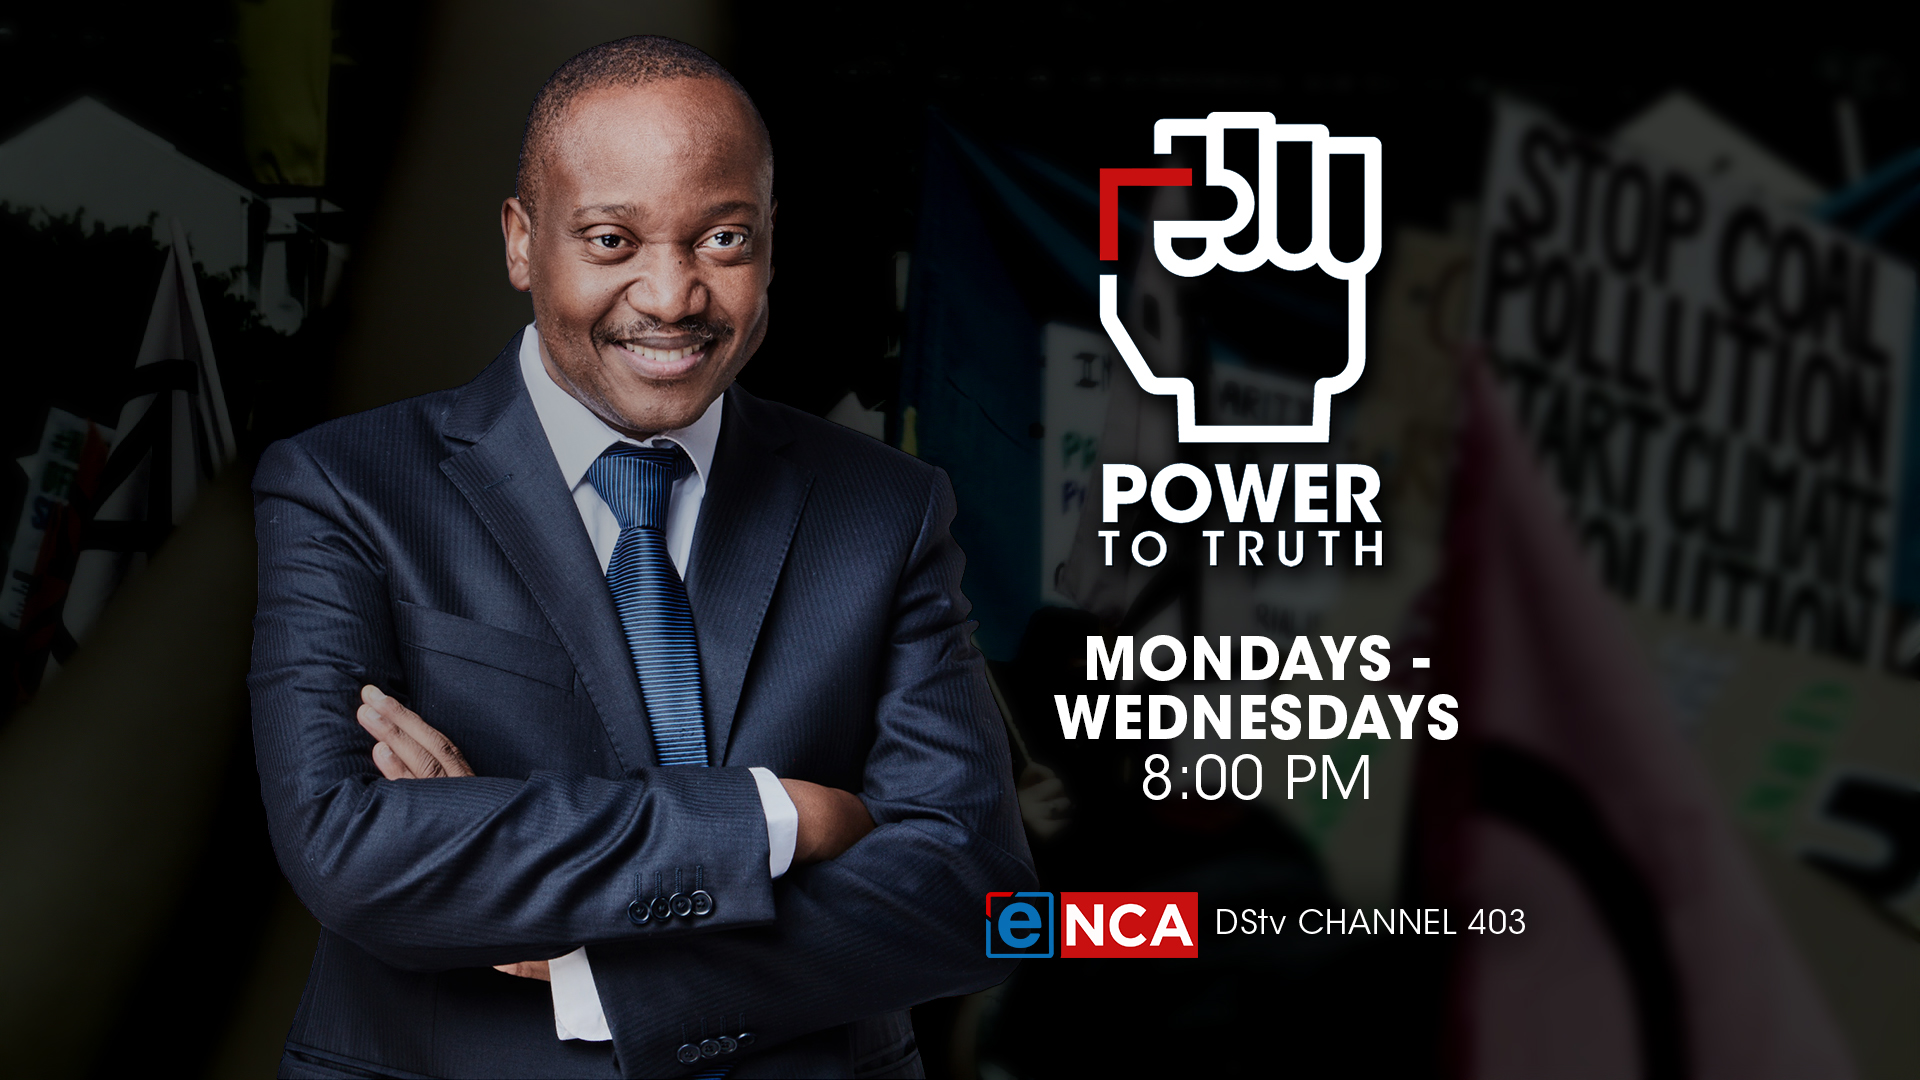 #PowerToTruth with @JJTabane on #eNCA - courageously confronting authority, calling out injustices on government officials and demanding change.